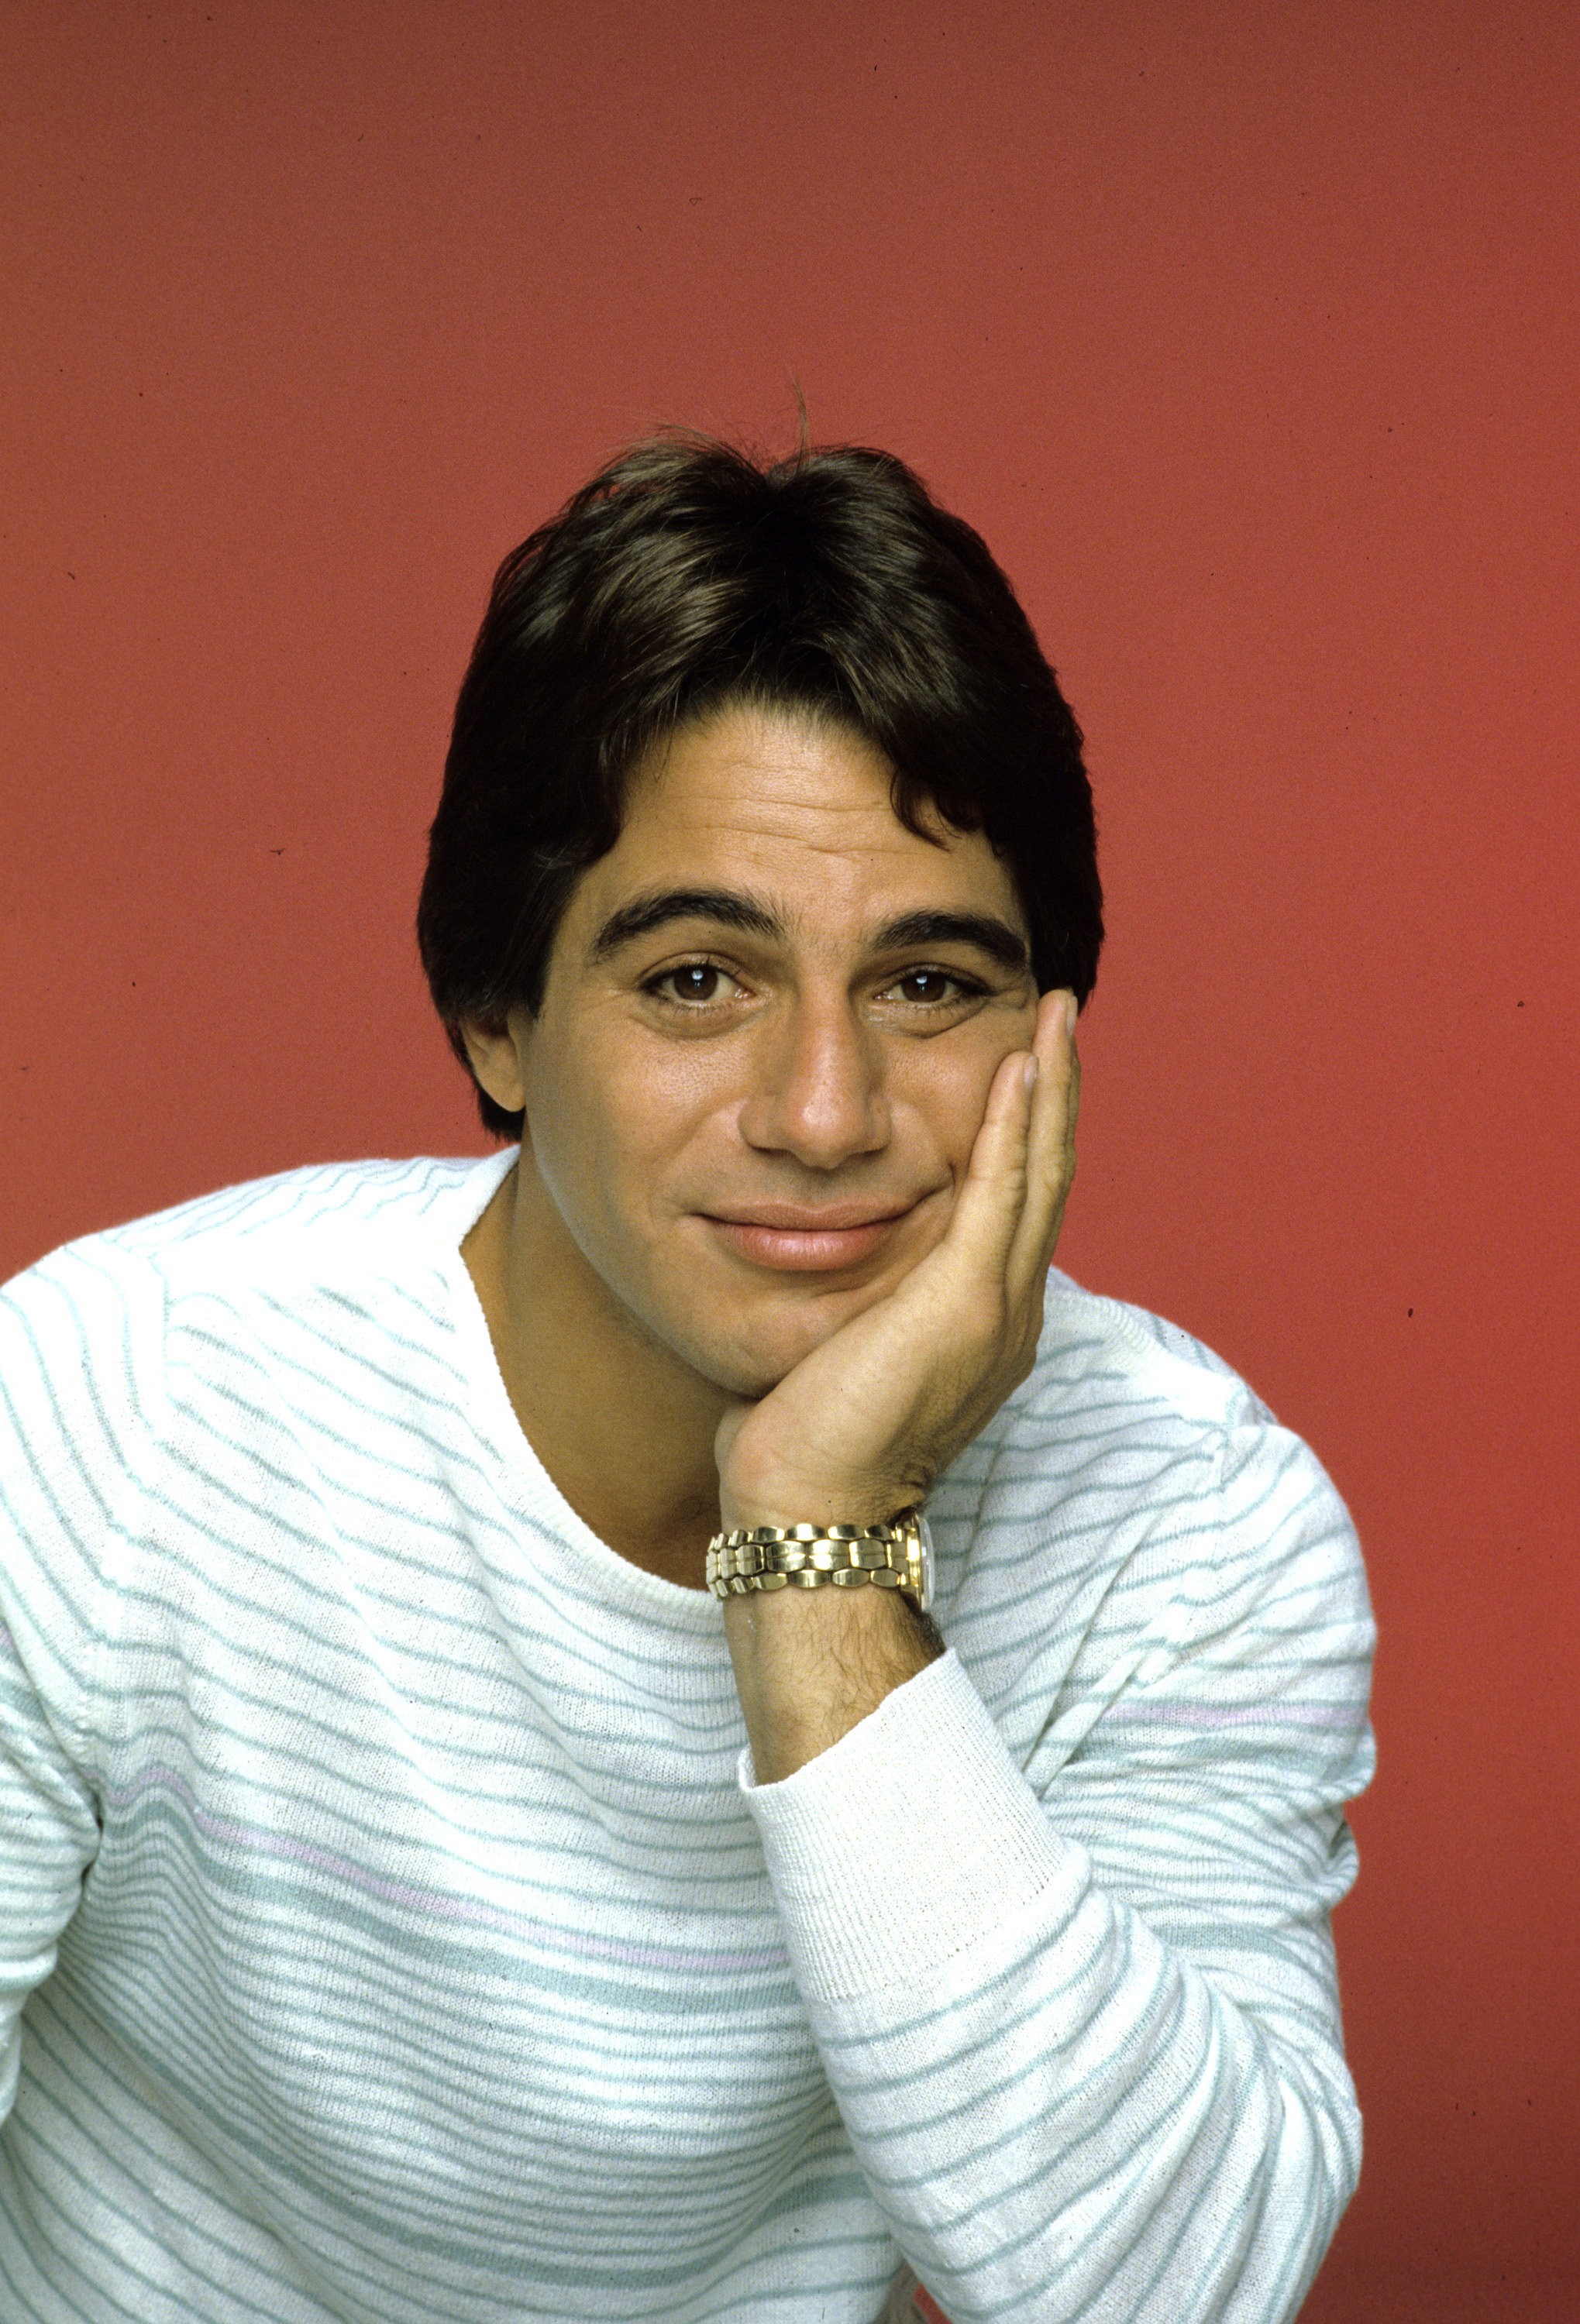 Tony Danza photographed for "Who's the Boss?" in 1984 | Source: Getty Images